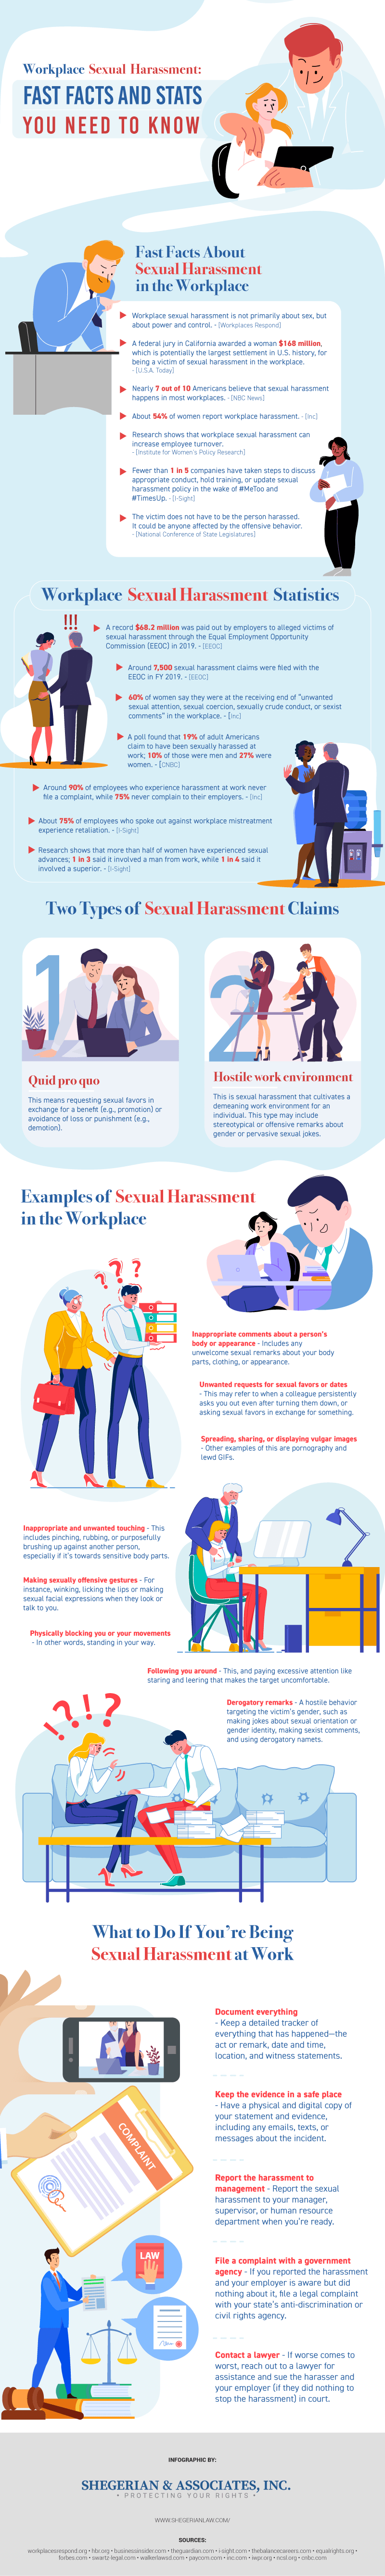 Sexual Harassment In The Workplace: Fast Facts & Statistics You Need To Know